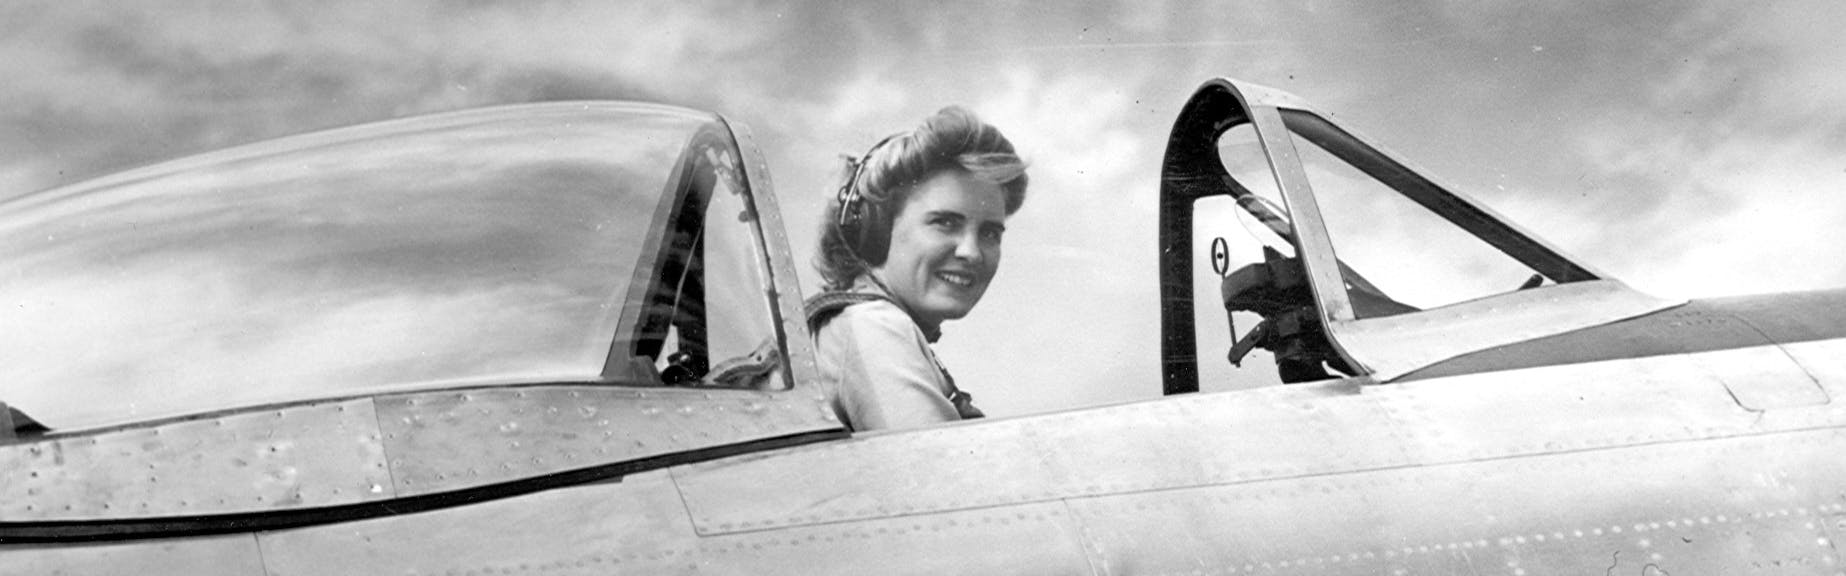 Celia Hunter sits in the cockpit of an open plane and smiles. The image is in black and white.